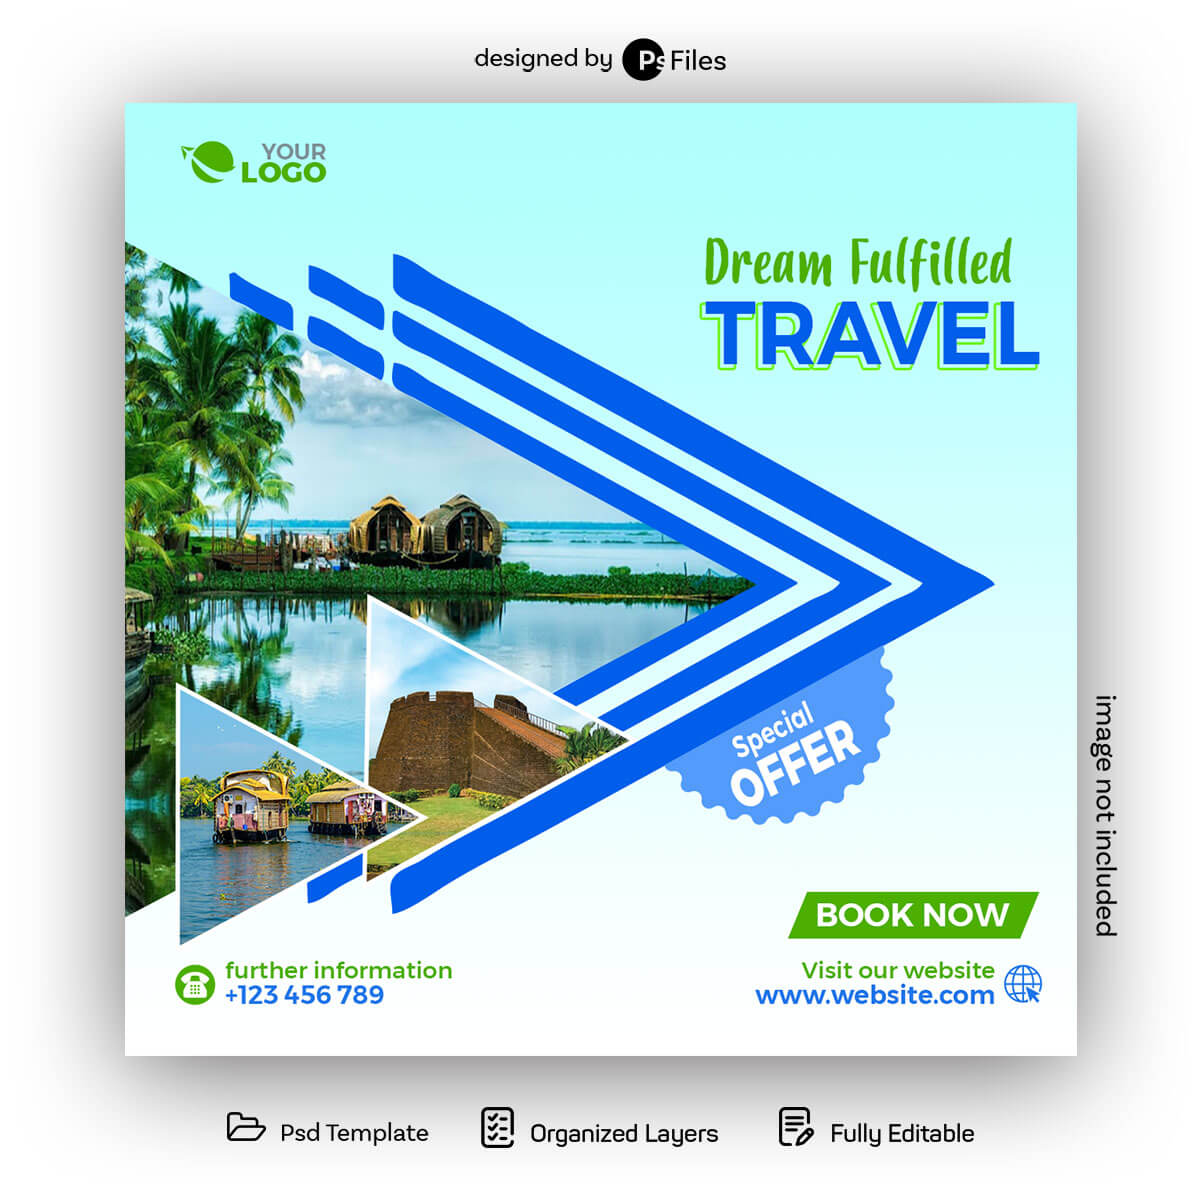 South India Kerala Tour And Travel Agency Free Social Media Post Design PSD Template